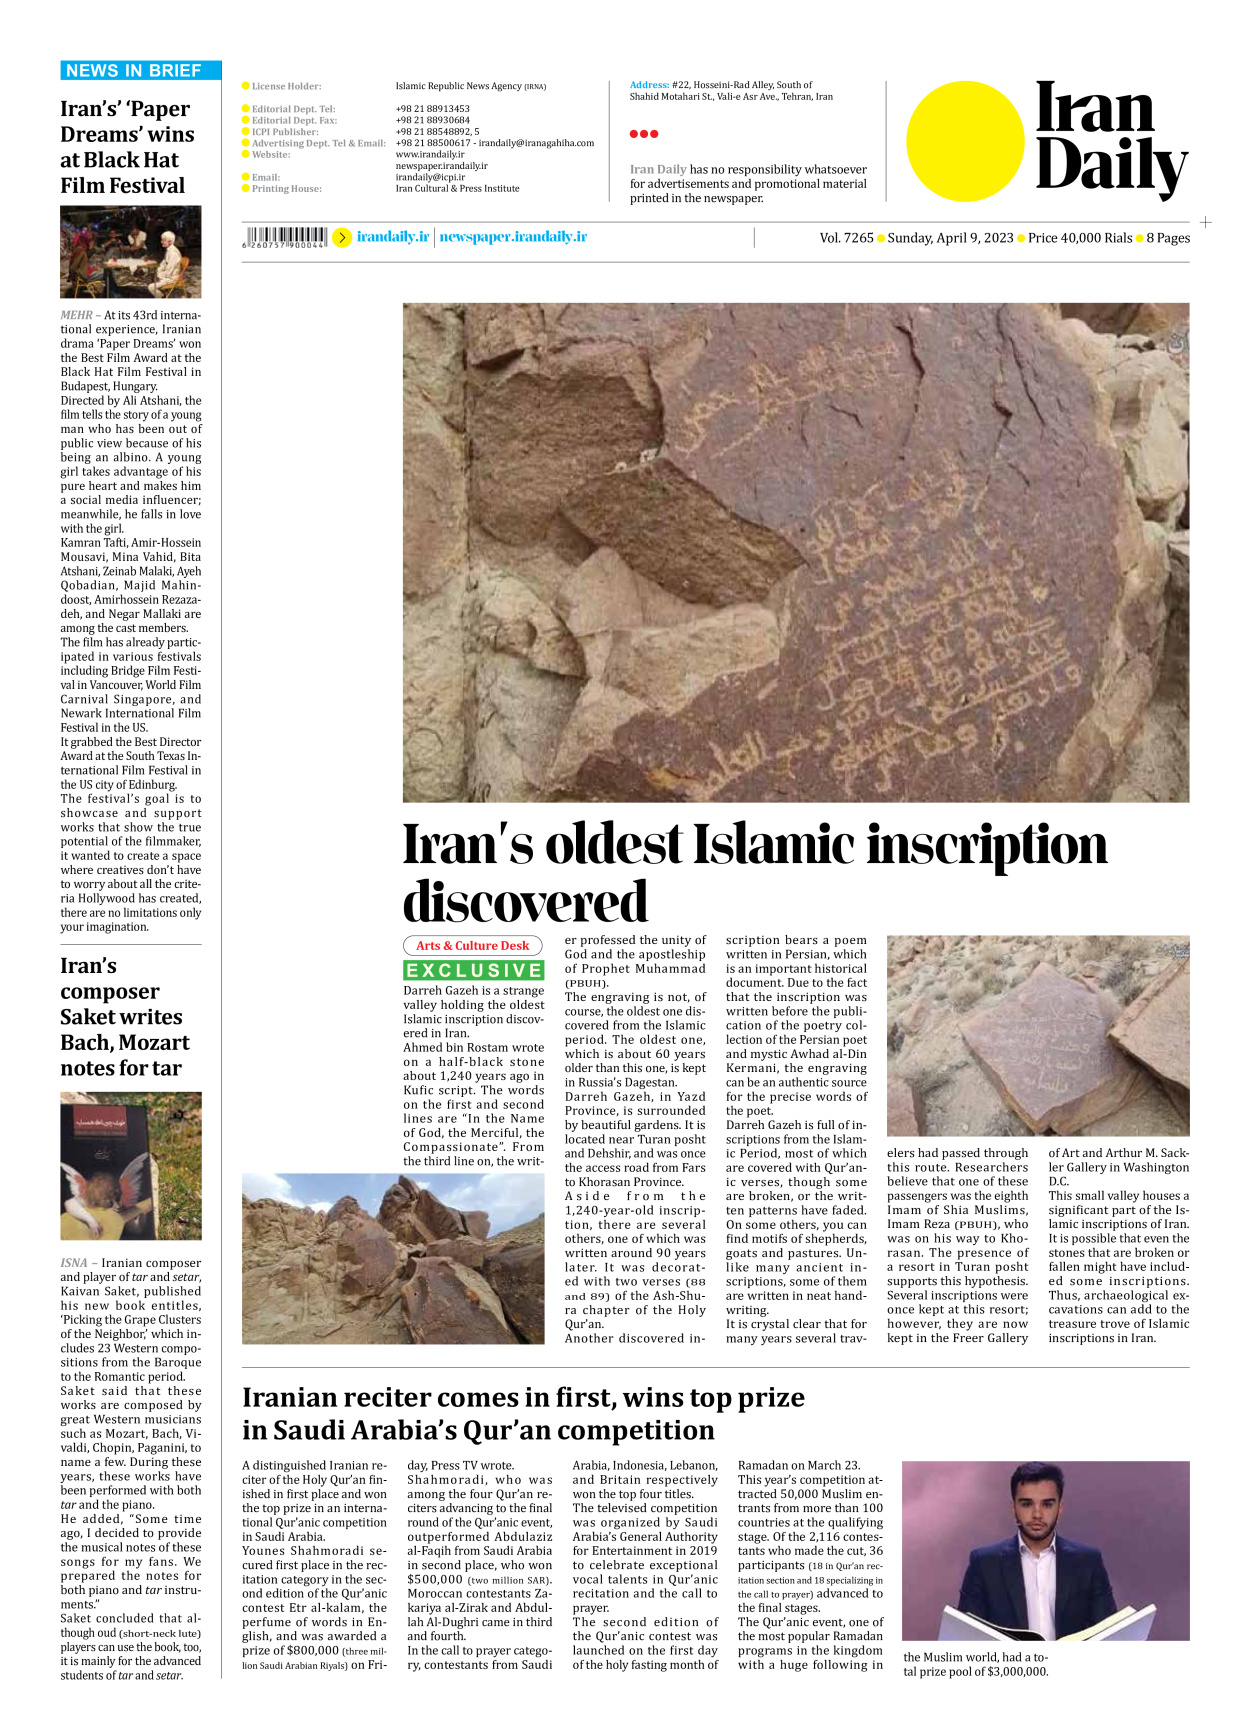 Iran Daily - Number Seven Thousand Two Hundred and Sixty Five - 09 April 2023 - Page 8